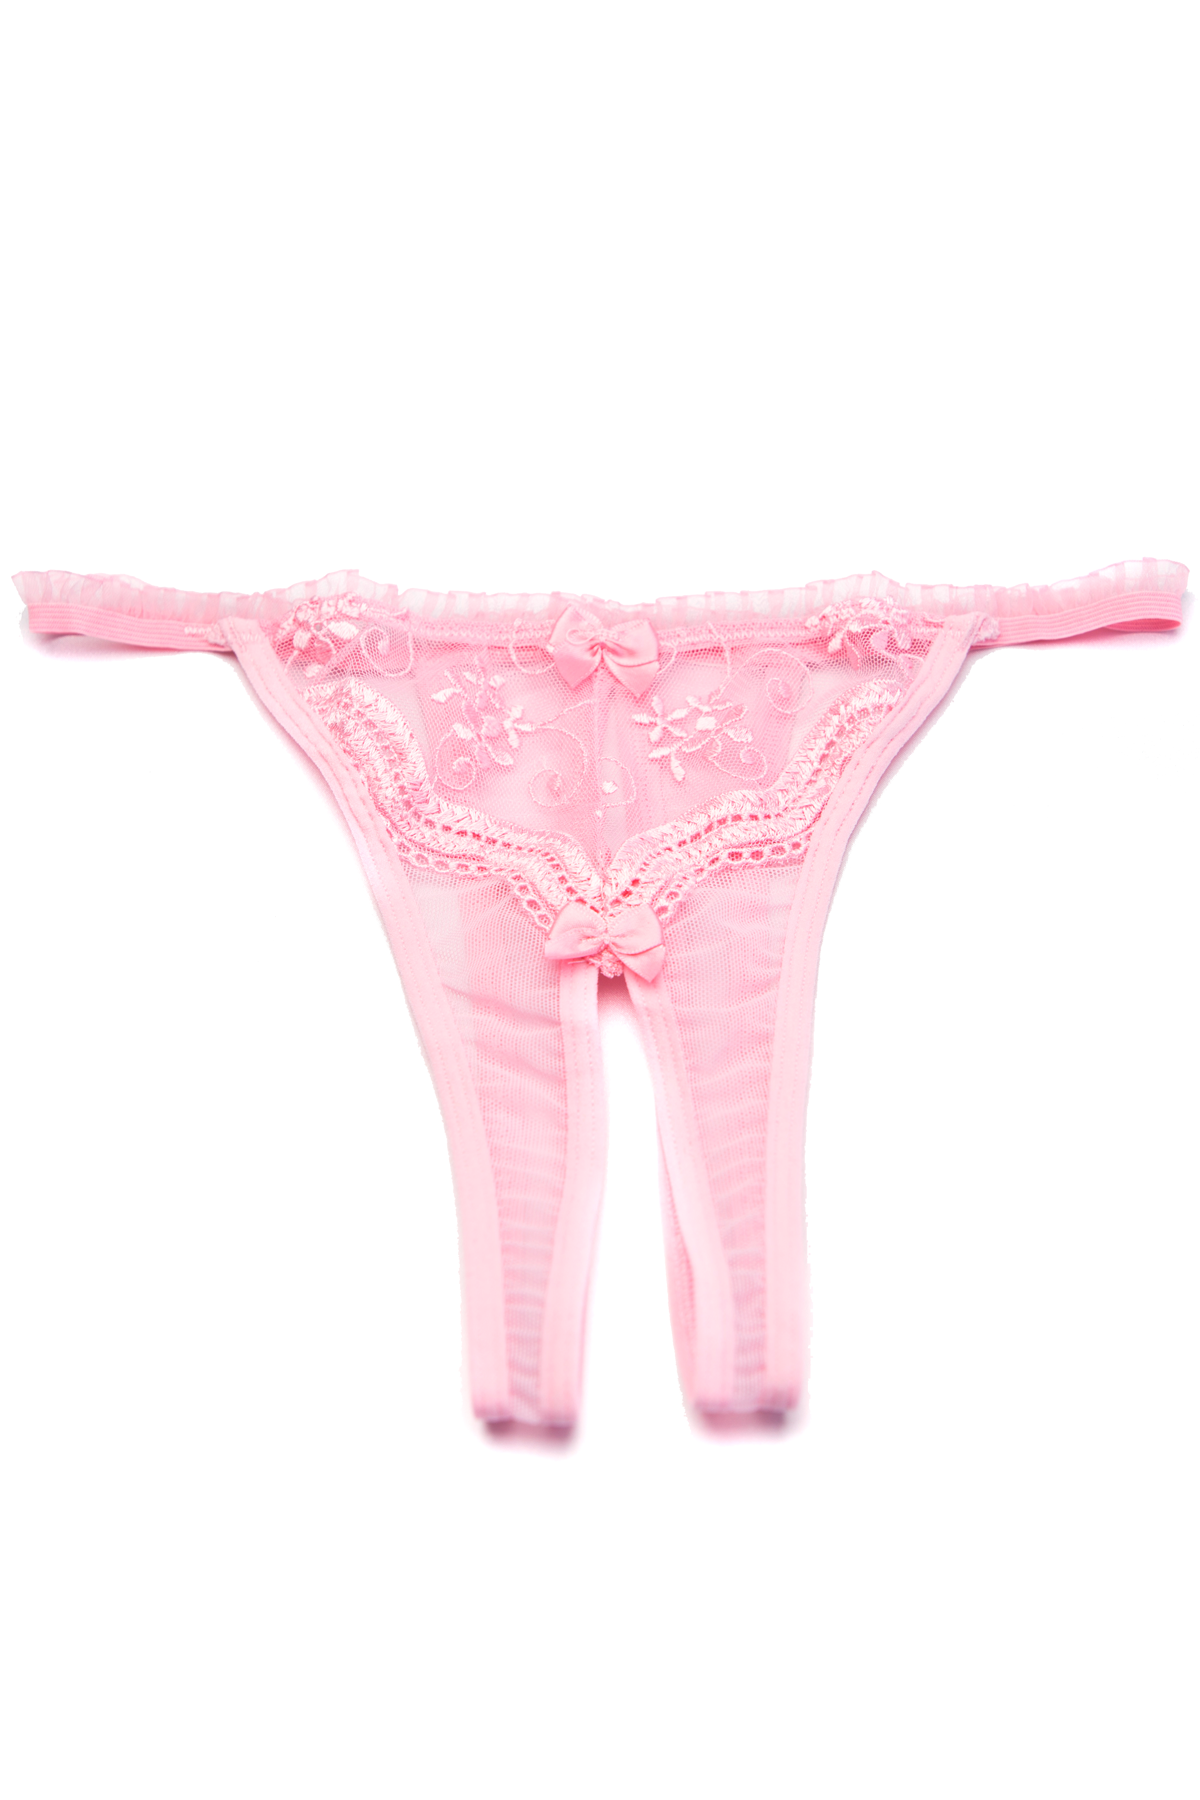 Buy Shyle Fluorescent Pink Scalloped Thong Panty - Panties for Women 